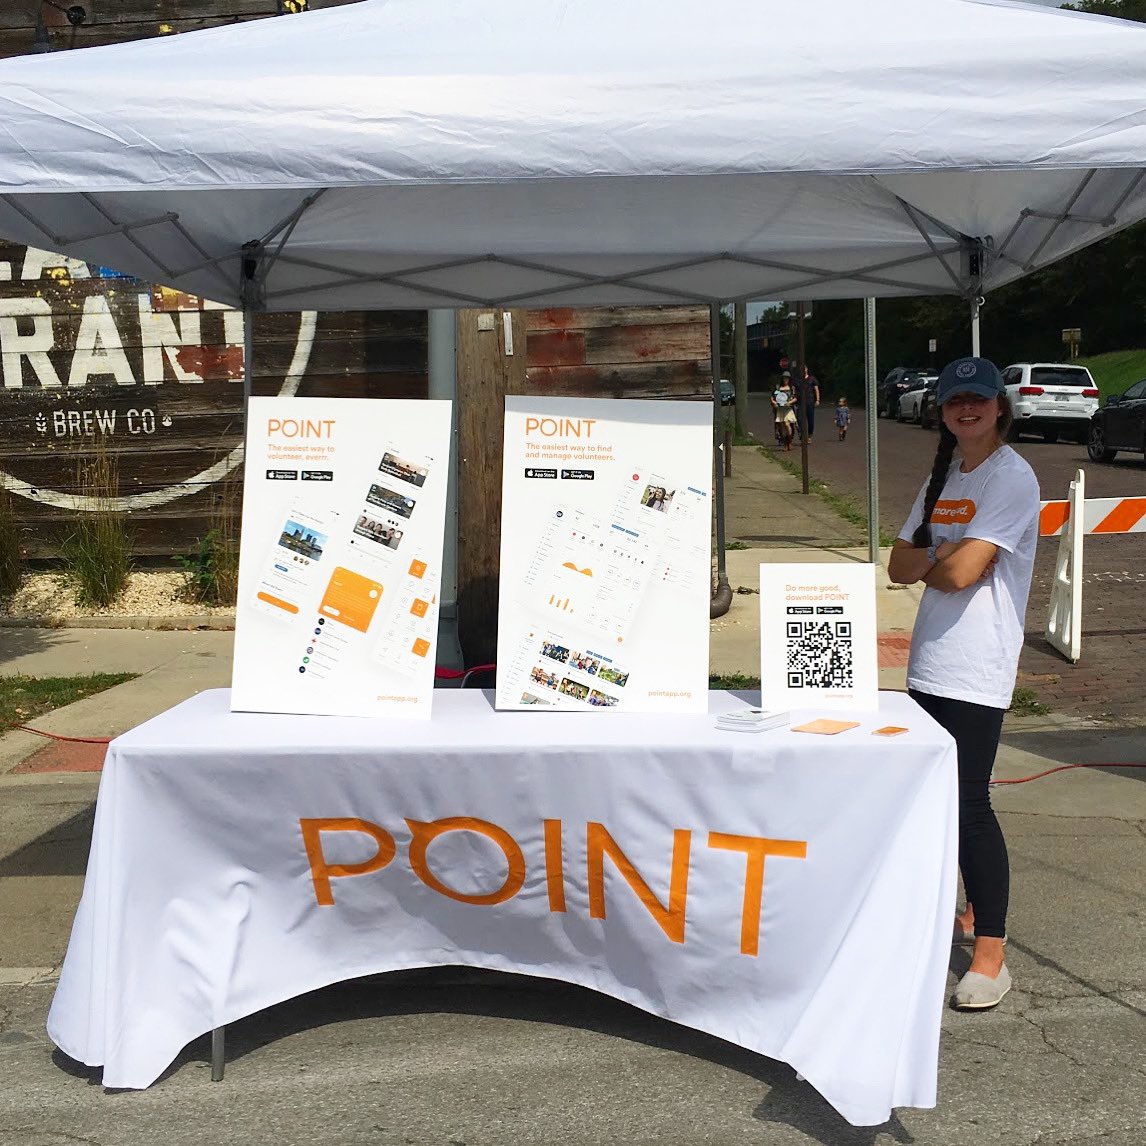 And today’s #VendorSpotlight goes toooooo..... @pointapp! POINT is a collaborative volunteer platform to bring people-power and free tech to local nonprofits. Learn more on their page today! 🧡